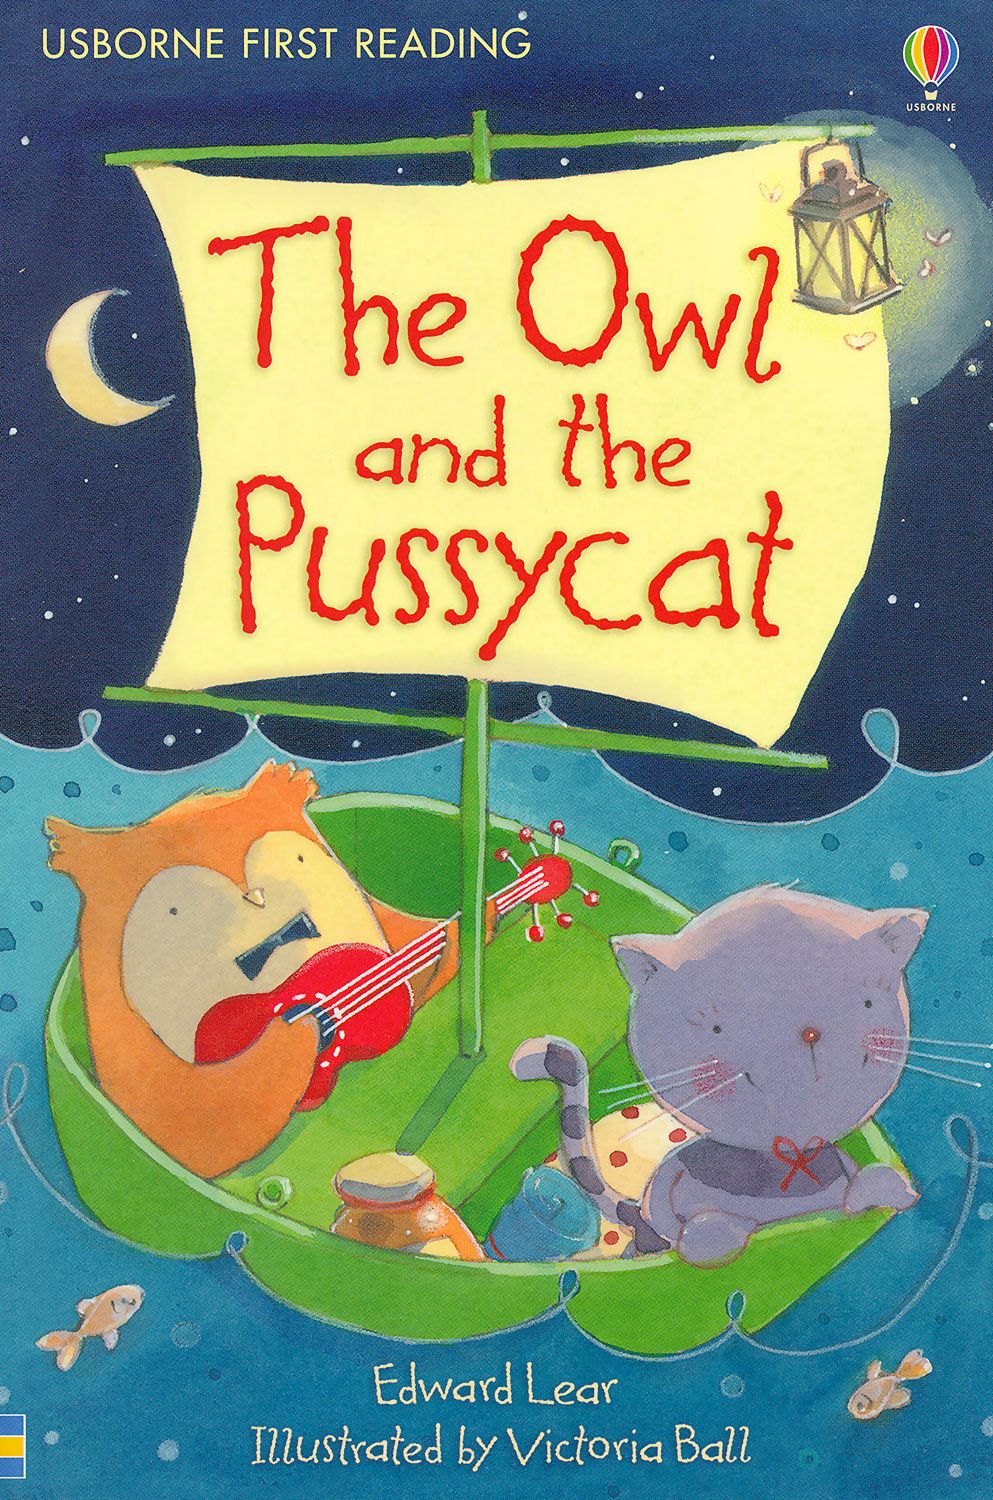 Storebg Usborne First Reading Level 4 The Owl And The Pussycat 